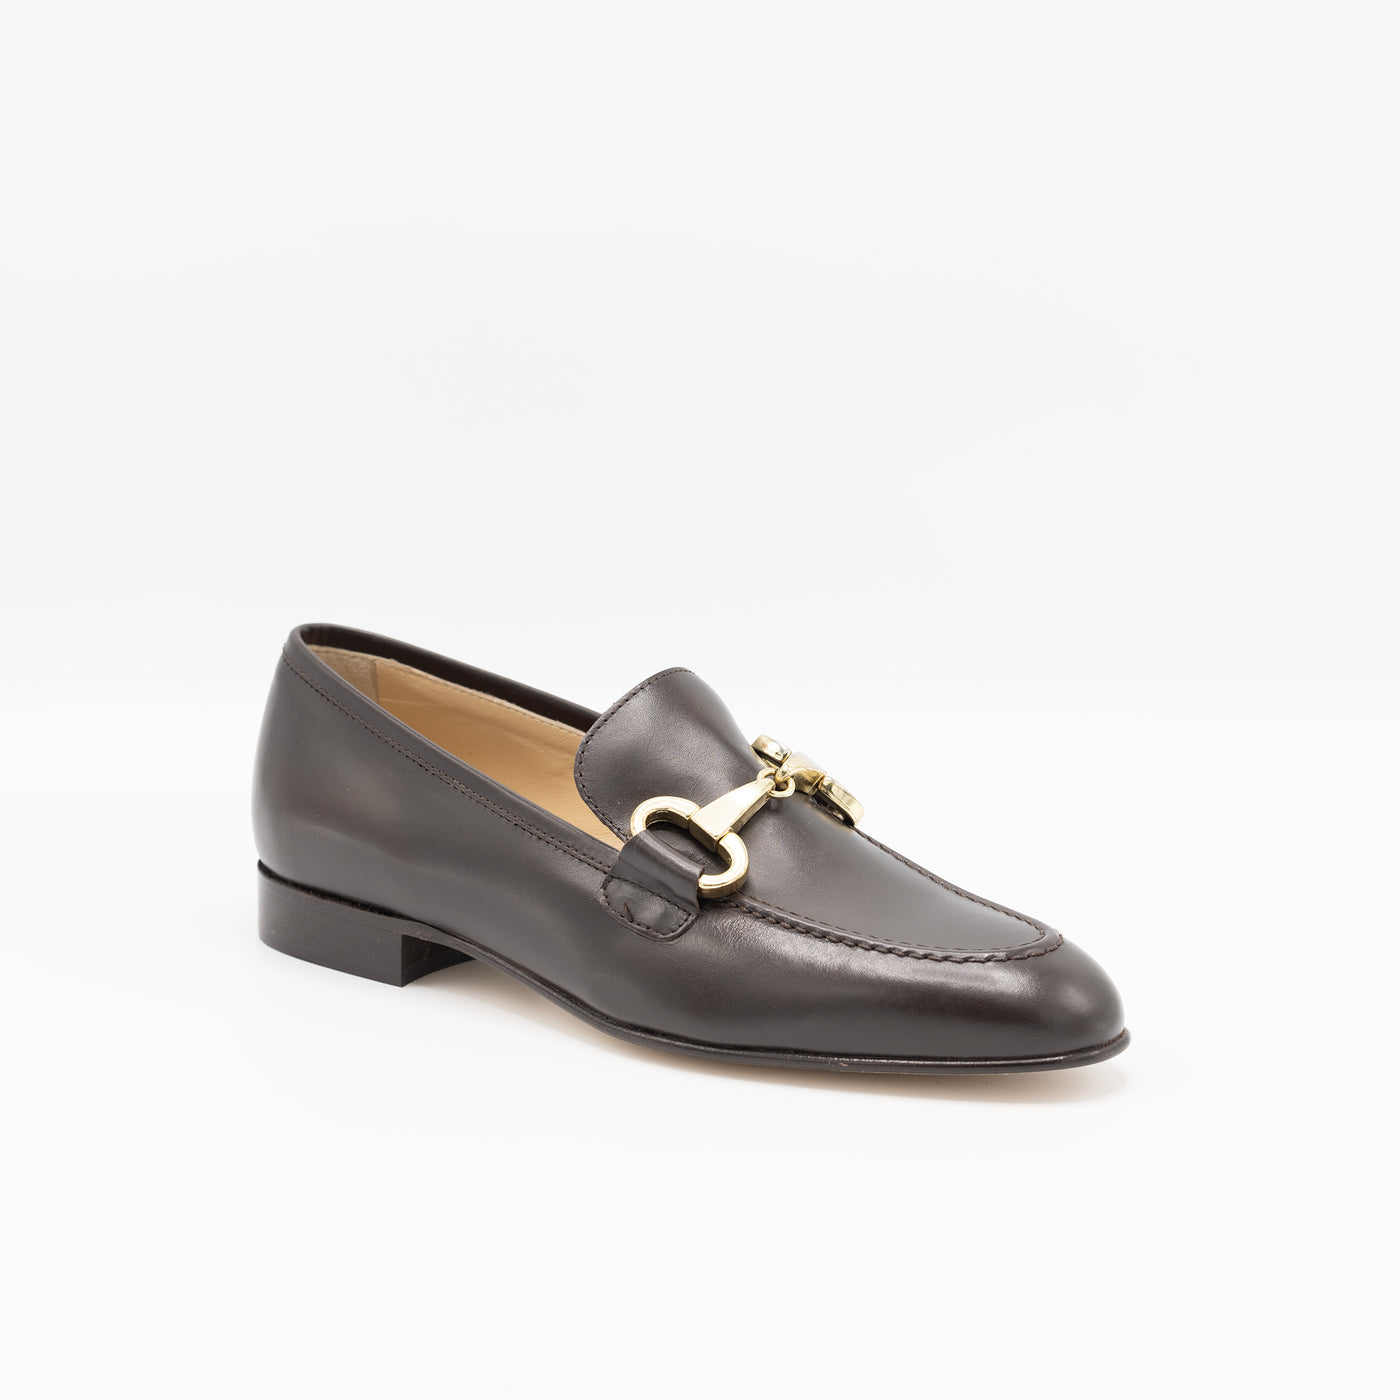 Horsebit loafers in brown leather. Leather soles. 